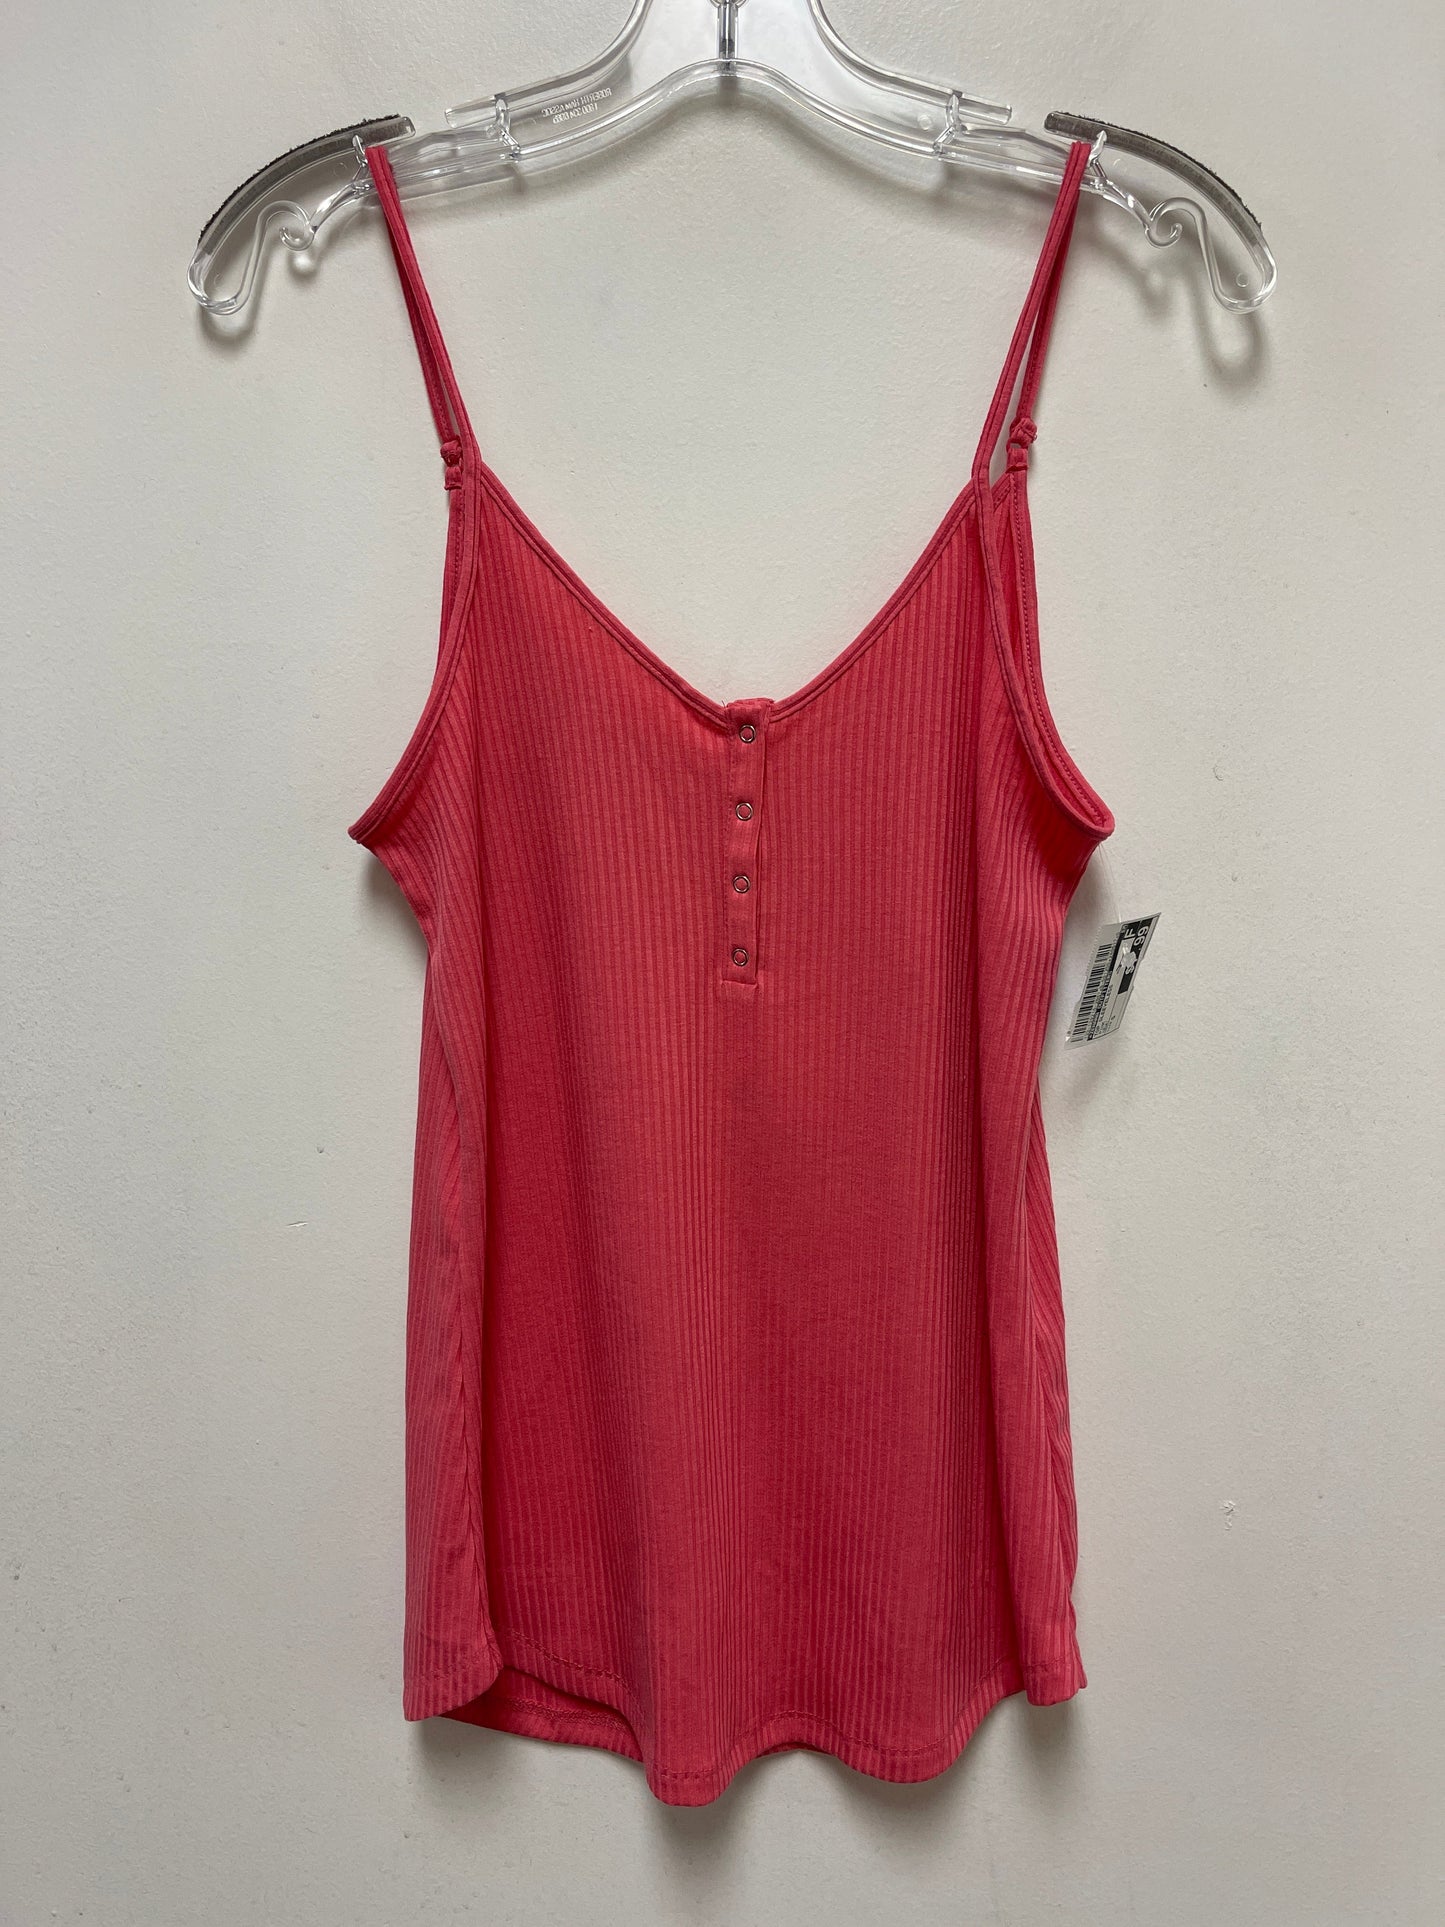 Pink Top Sleeveless Zenana Outfitters, Size S